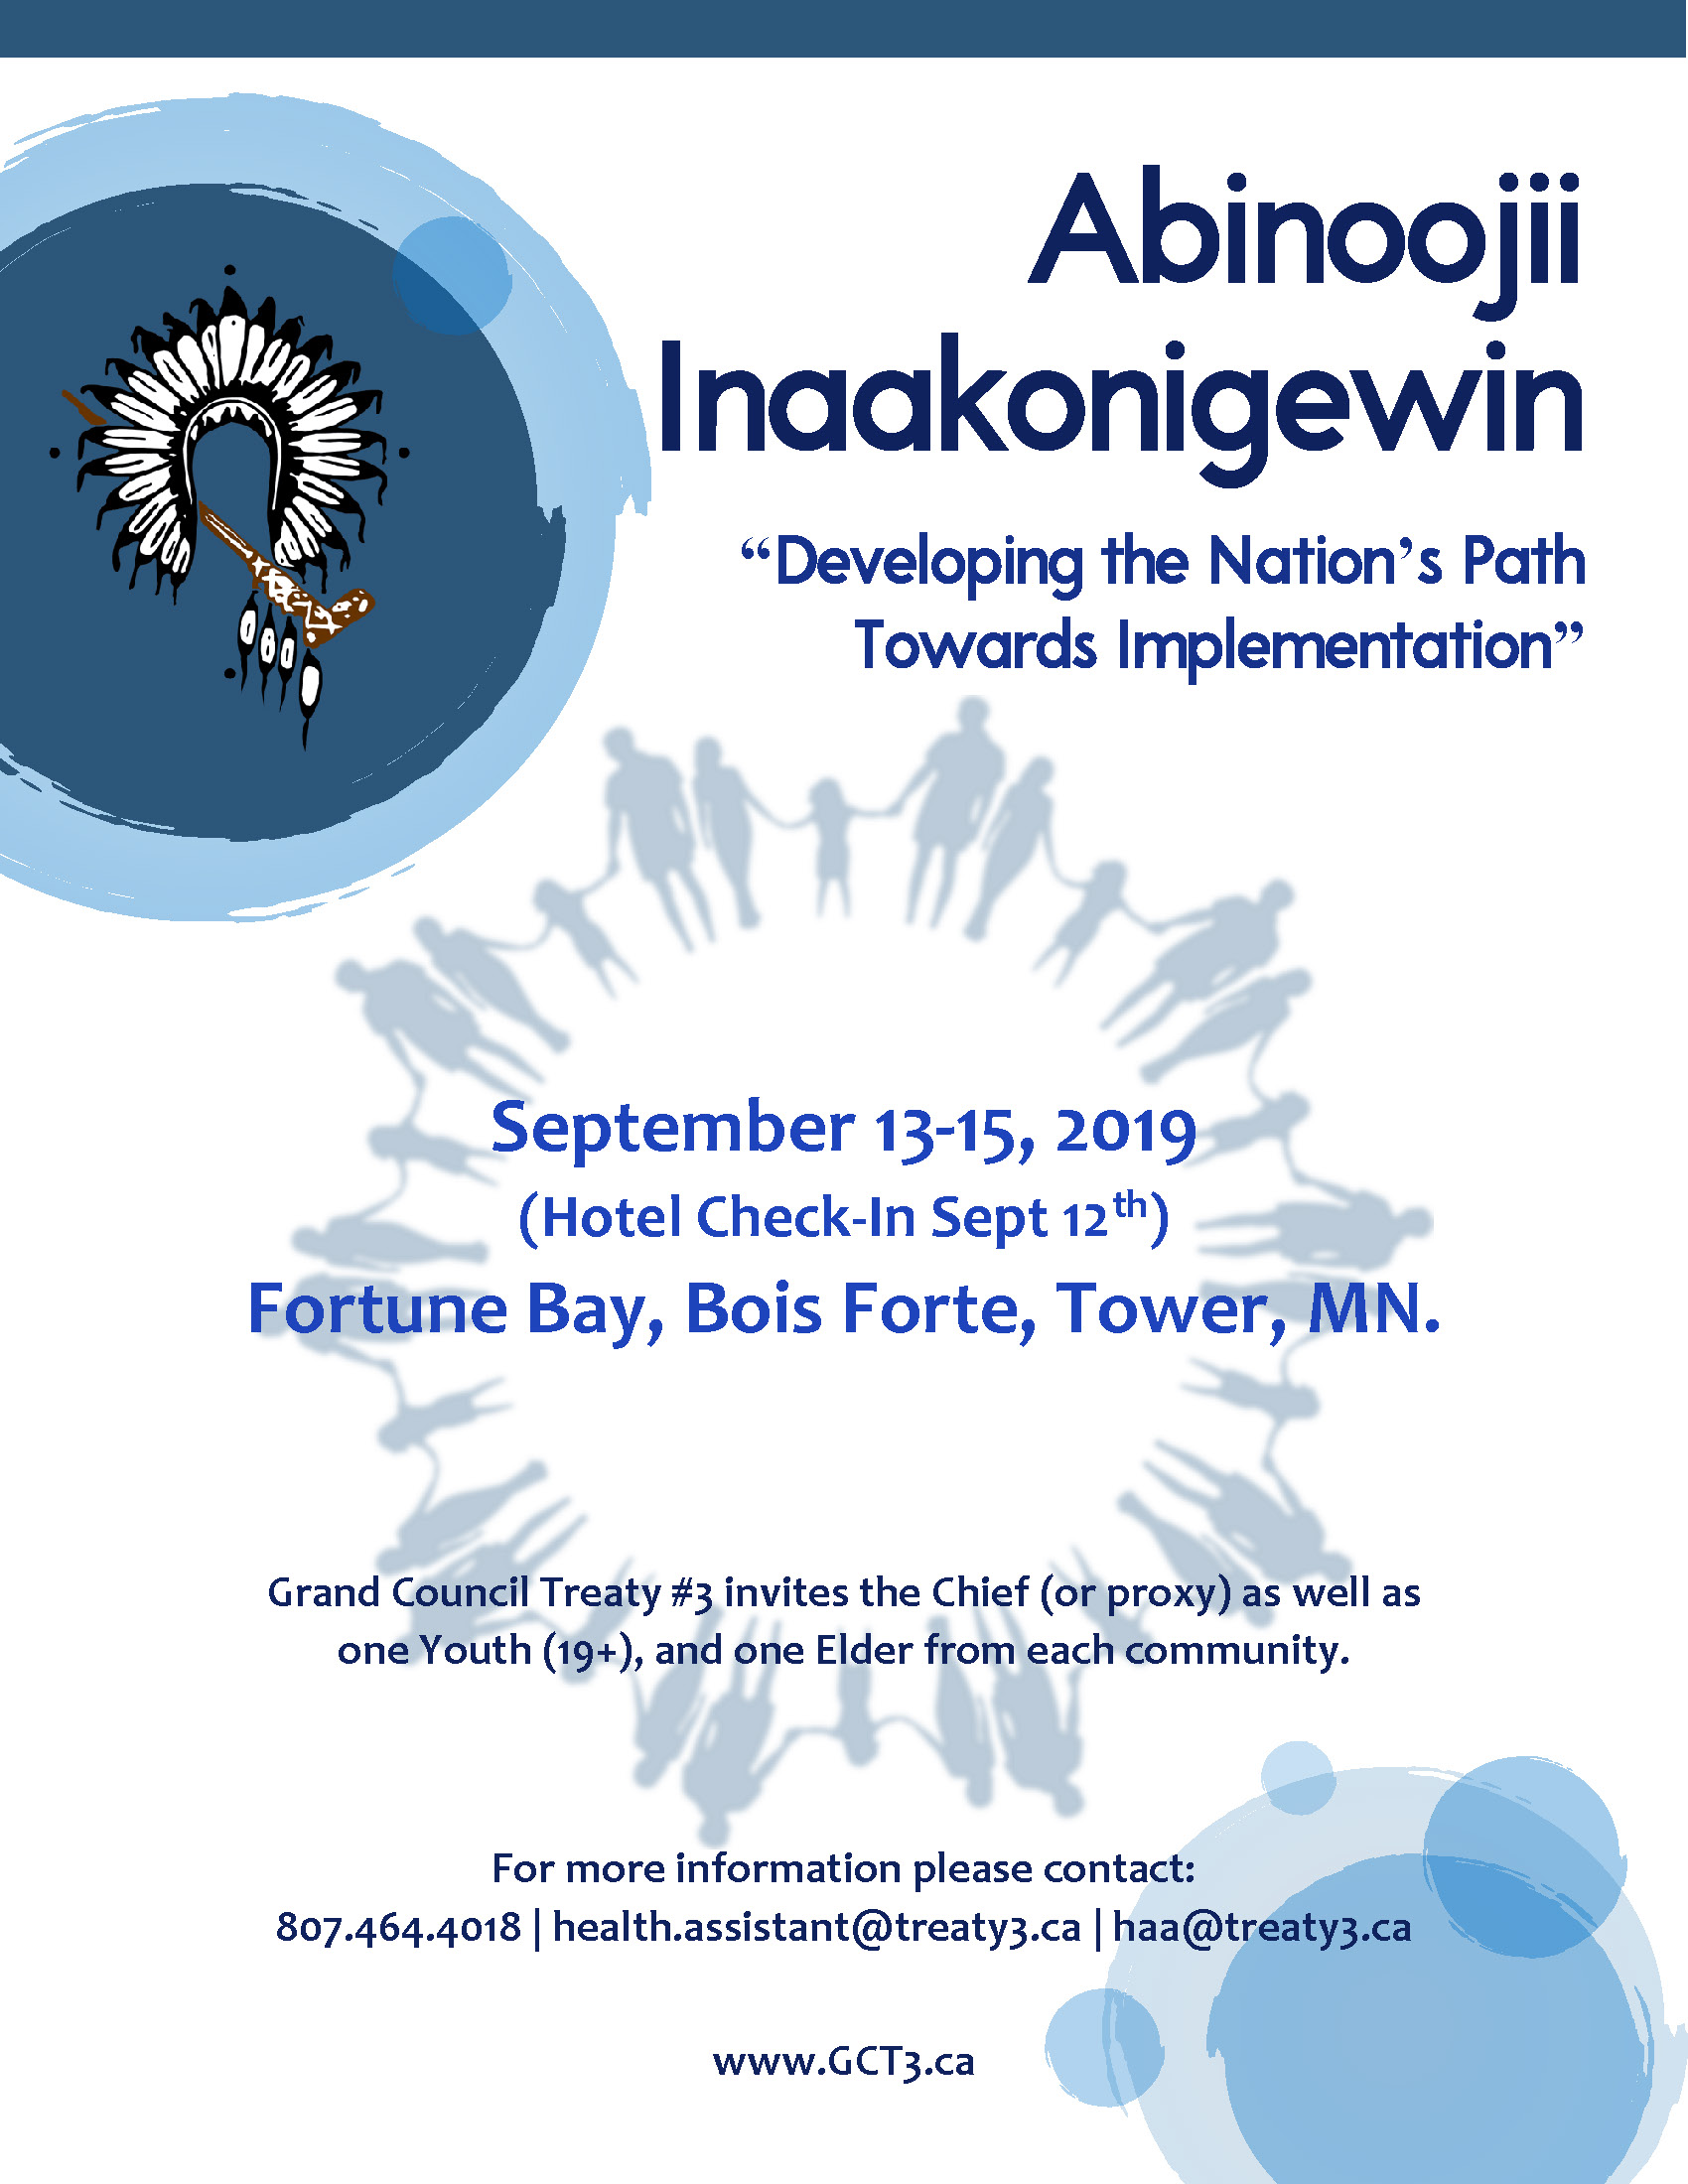 Abinoojii Inaakonigewin "Developing the Nation's Path towards Implementation" (REGISTRATION CLOSED)